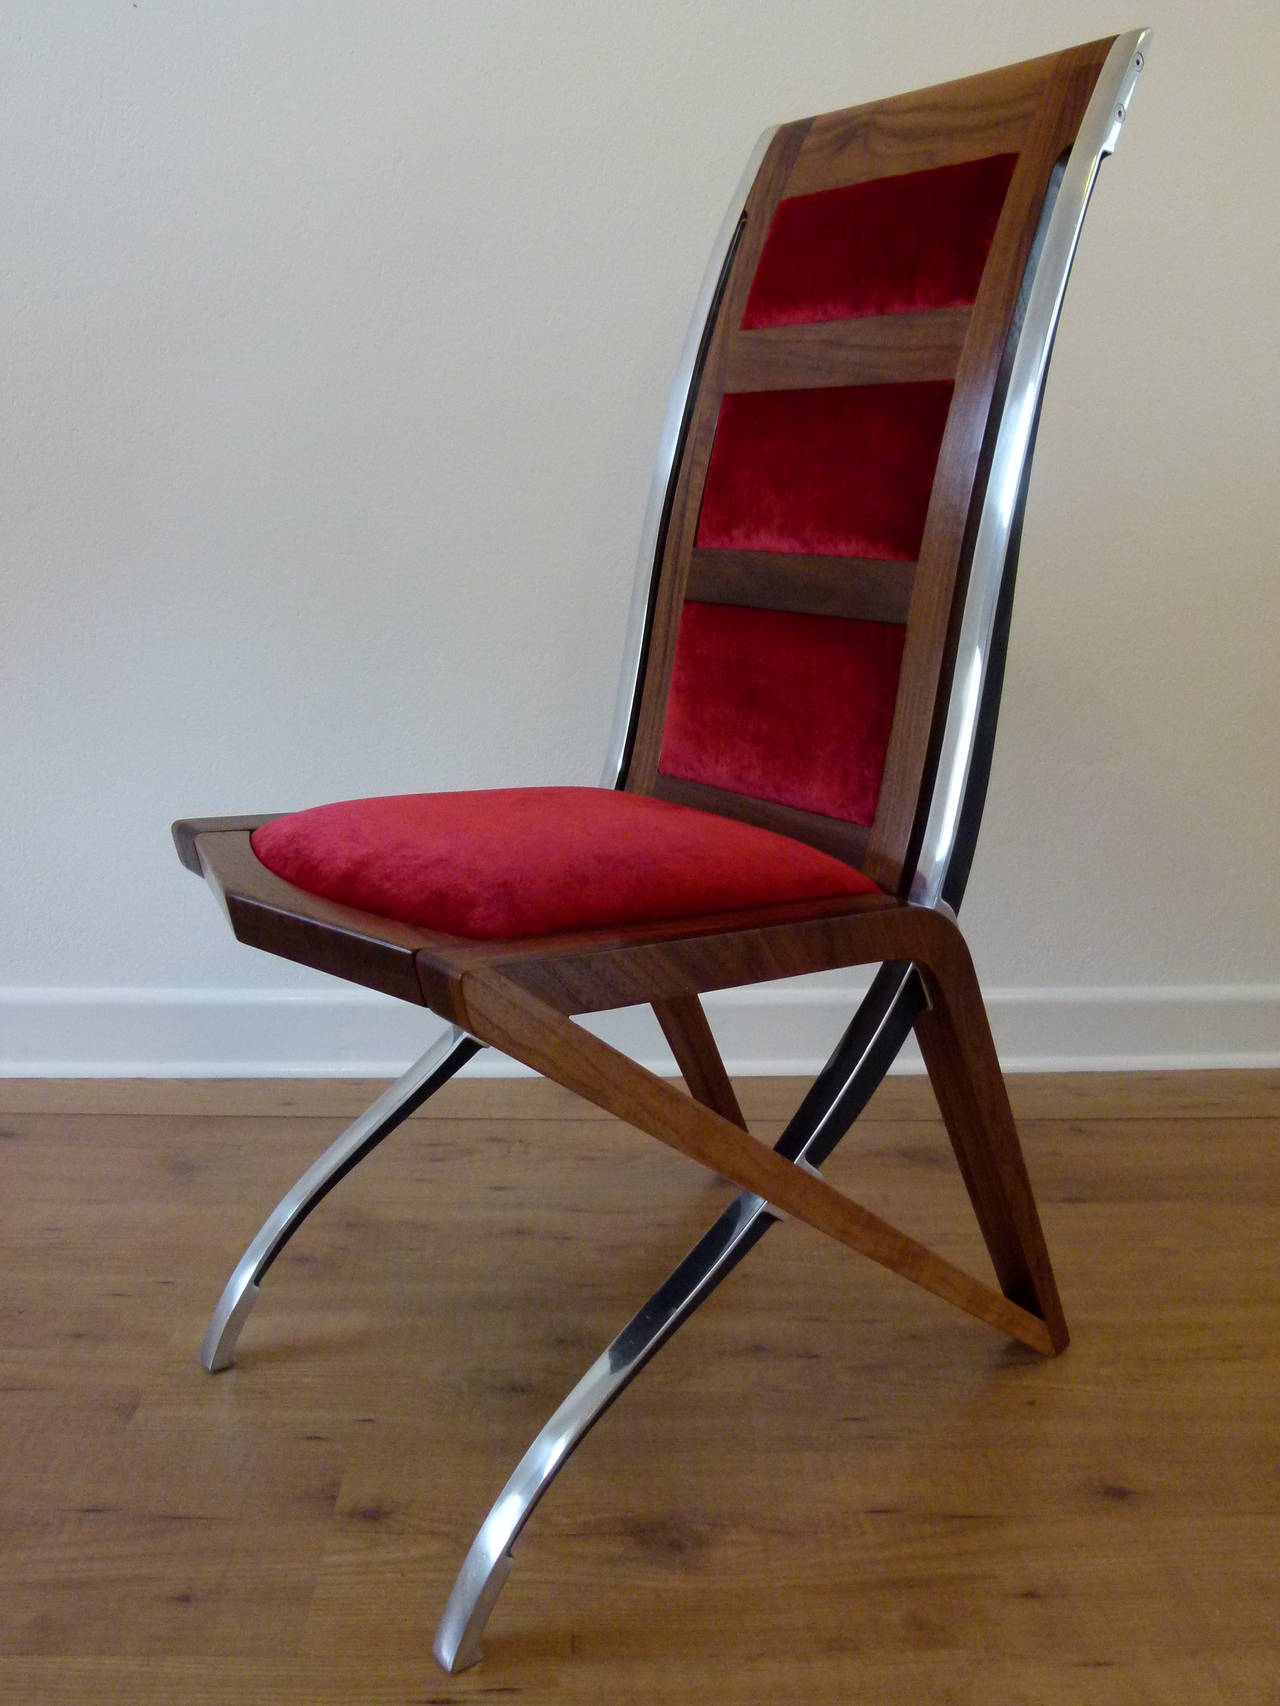 Toro Contemporary Dining Chair by British Designer Sebastian Blakeley In Excellent Condition For Sale In London, GB